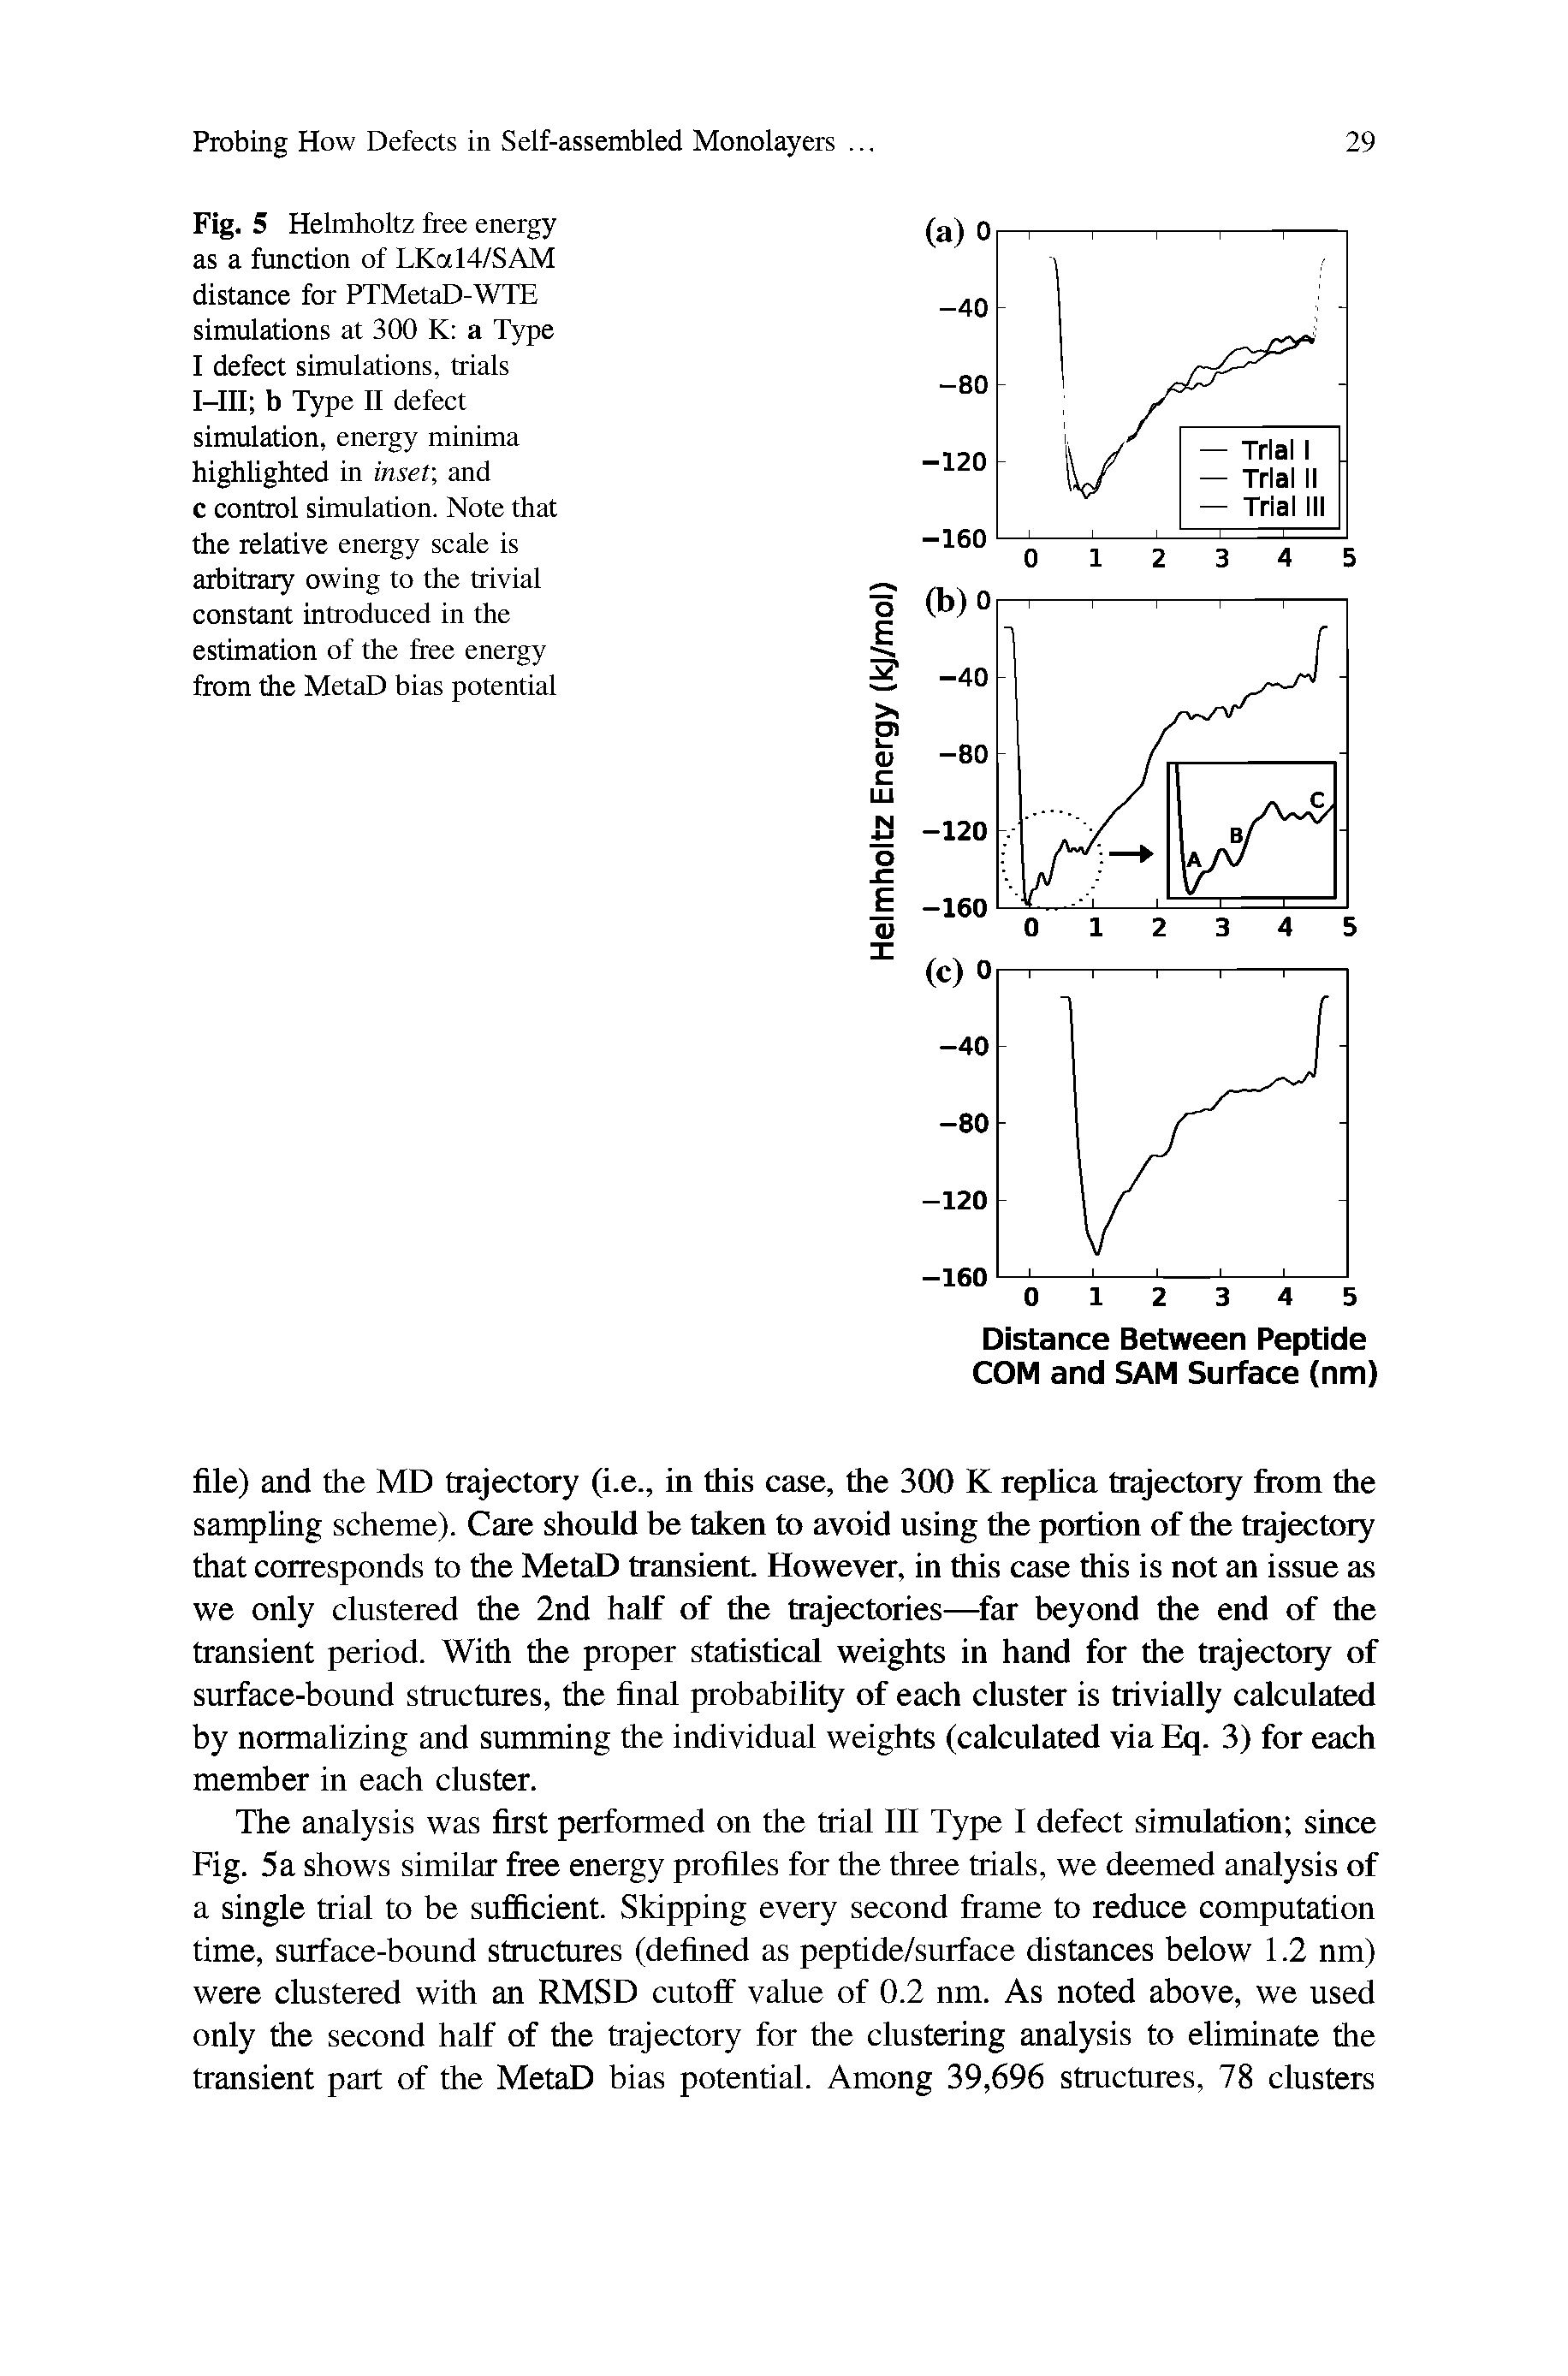 Fig. 5 Helmholtz free energy as a funetion of LKal4/SAM distance for PTMetaD-WTE simulations at 300 K a T) pe I defect simulations, trials I-in b Type n defect simulation, energy minima highlighted in inset and c control simulation. Note that the relative energy scale is arbitrary owing to the trivial constant introduced in the estimation of the free energy fixim the MetaD bias potential...